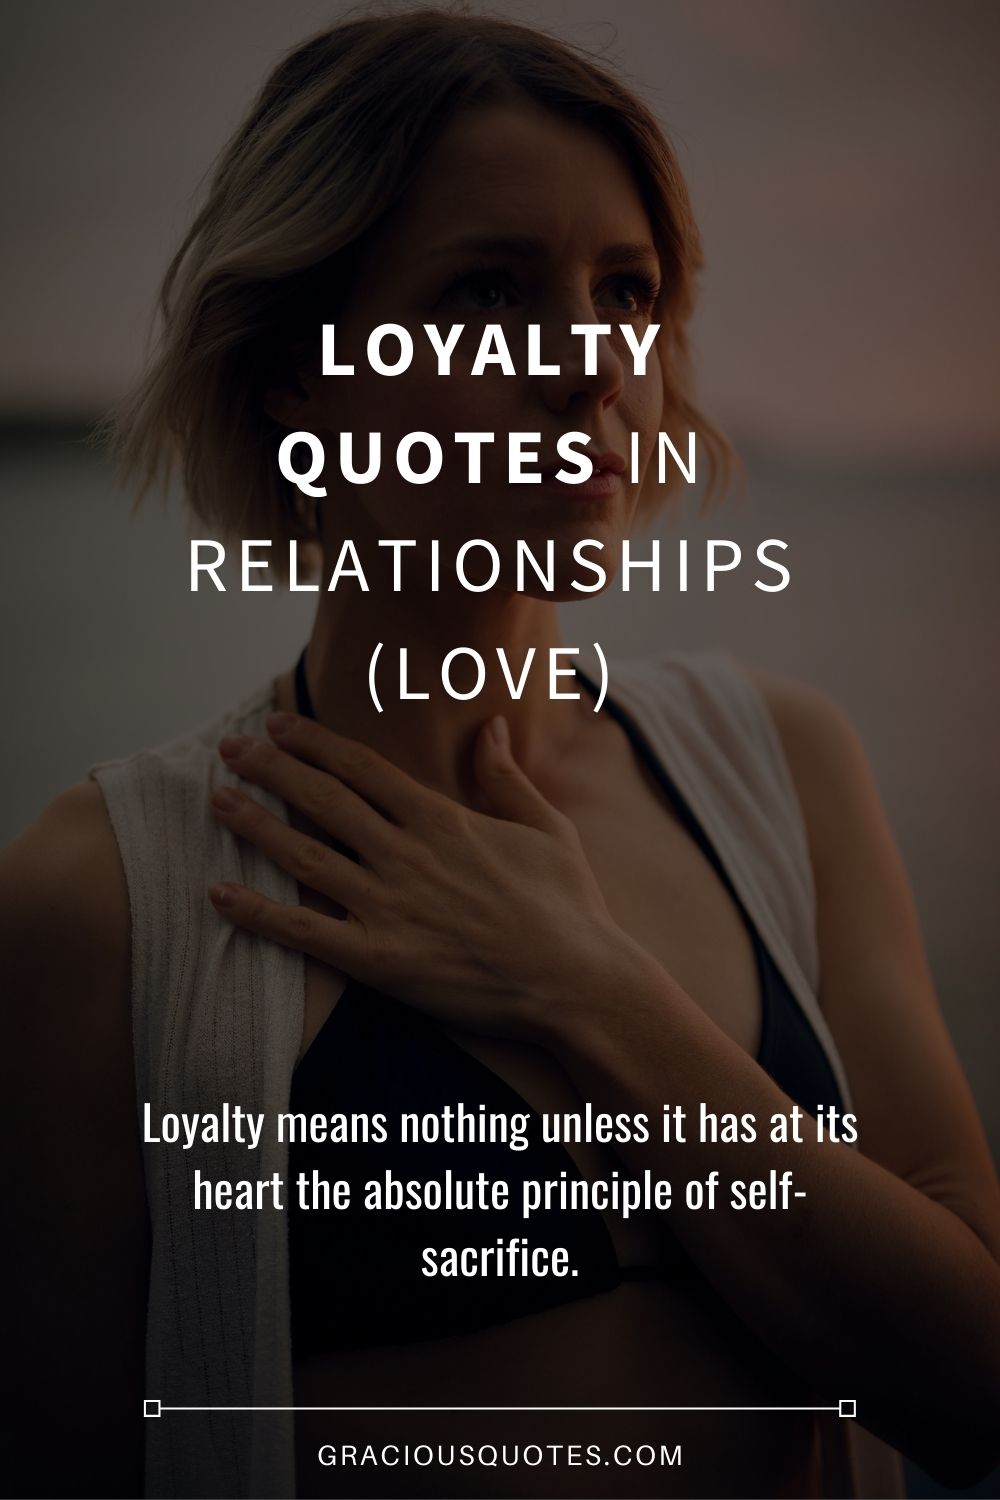 LOYALTY QUOTES in Relationships (LOVE) - Gracious Quotes